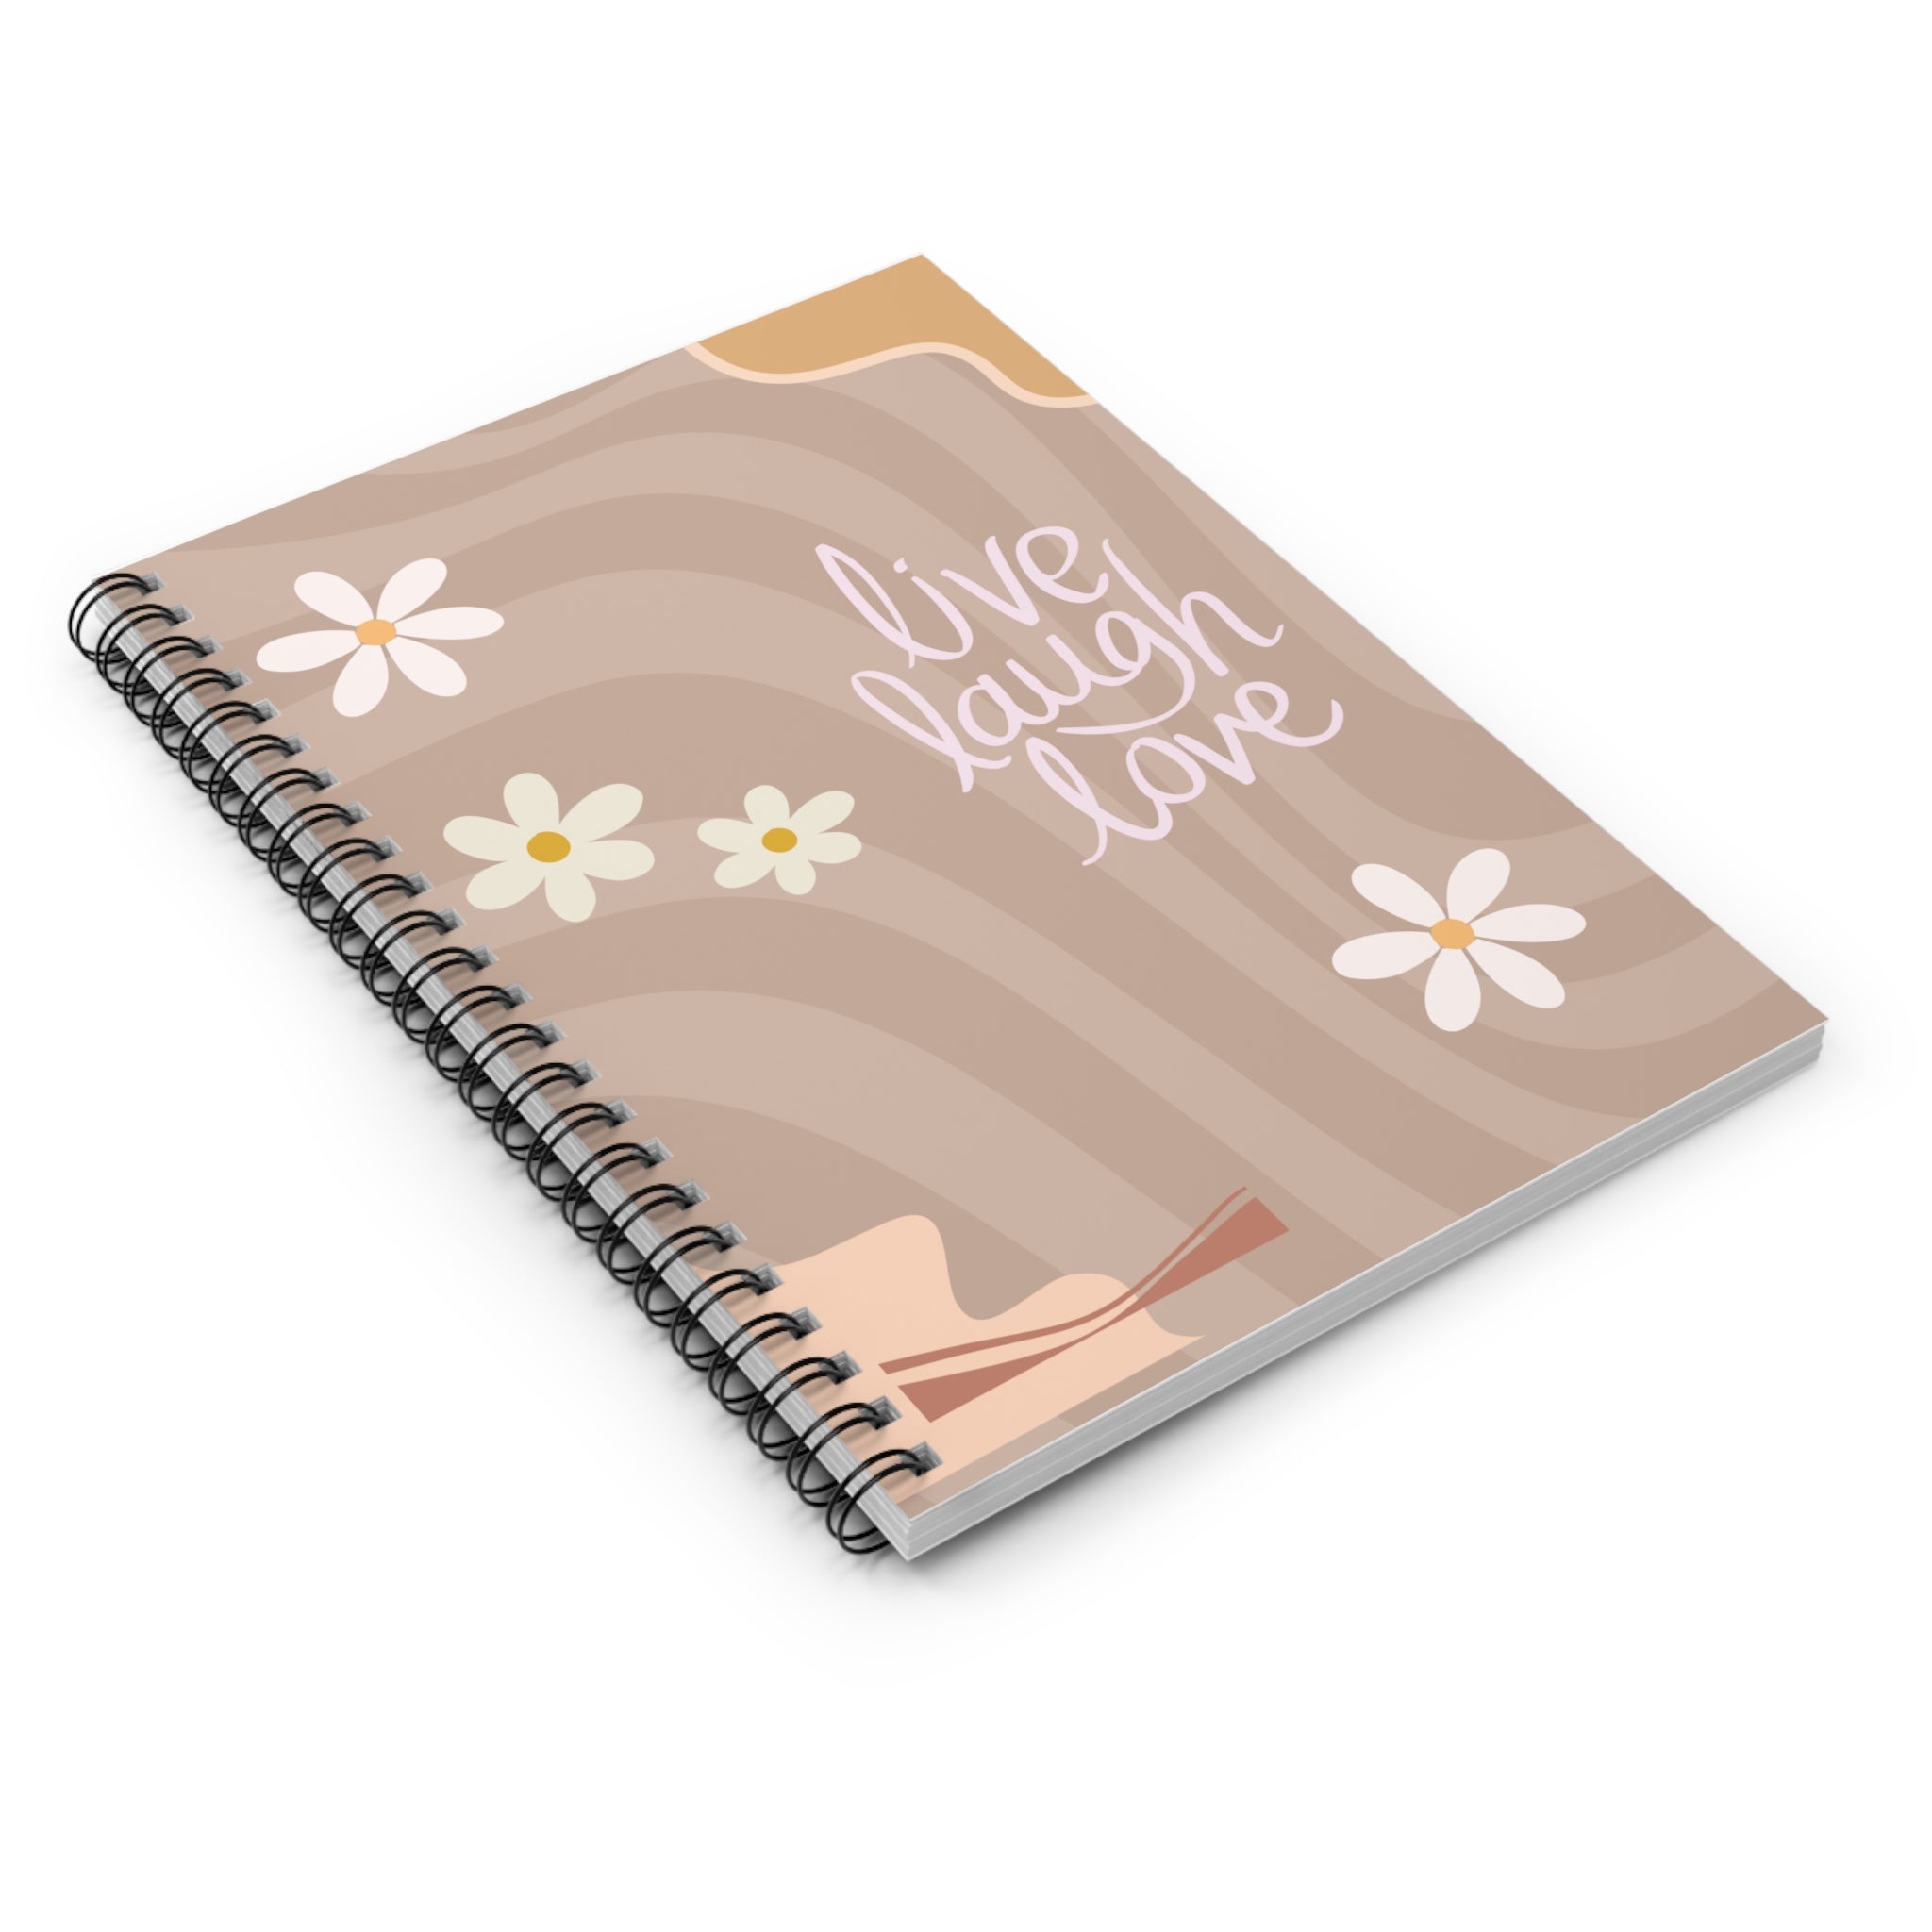 Live Laugh Love Spiral Notebook - Ruled Line